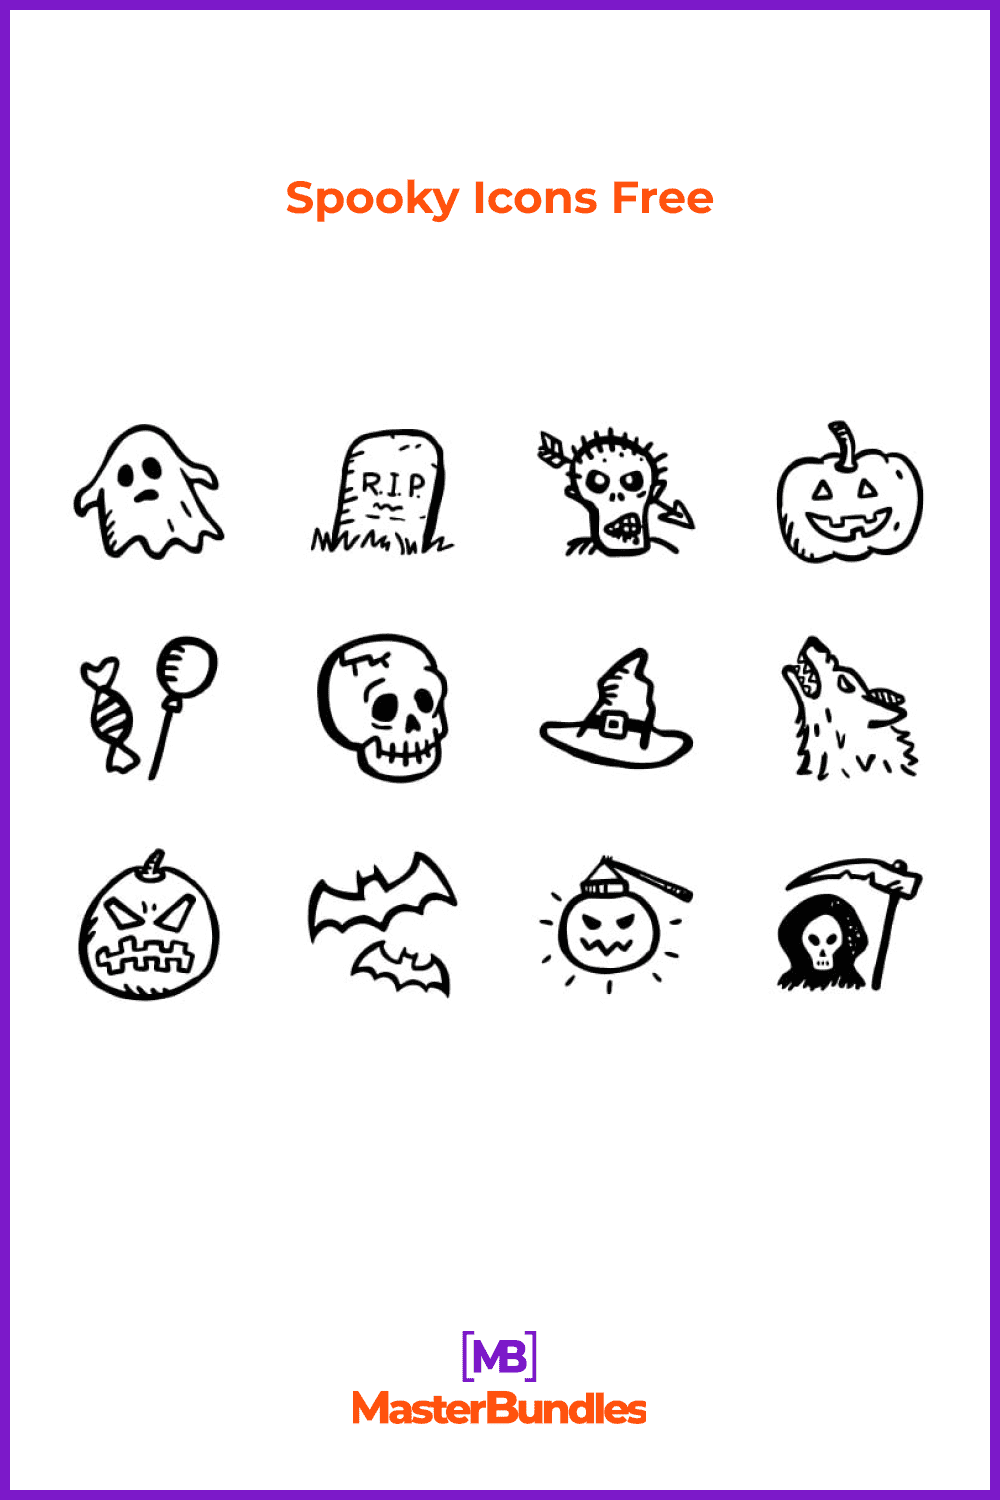 Black hand-drawn icons for Halloween.